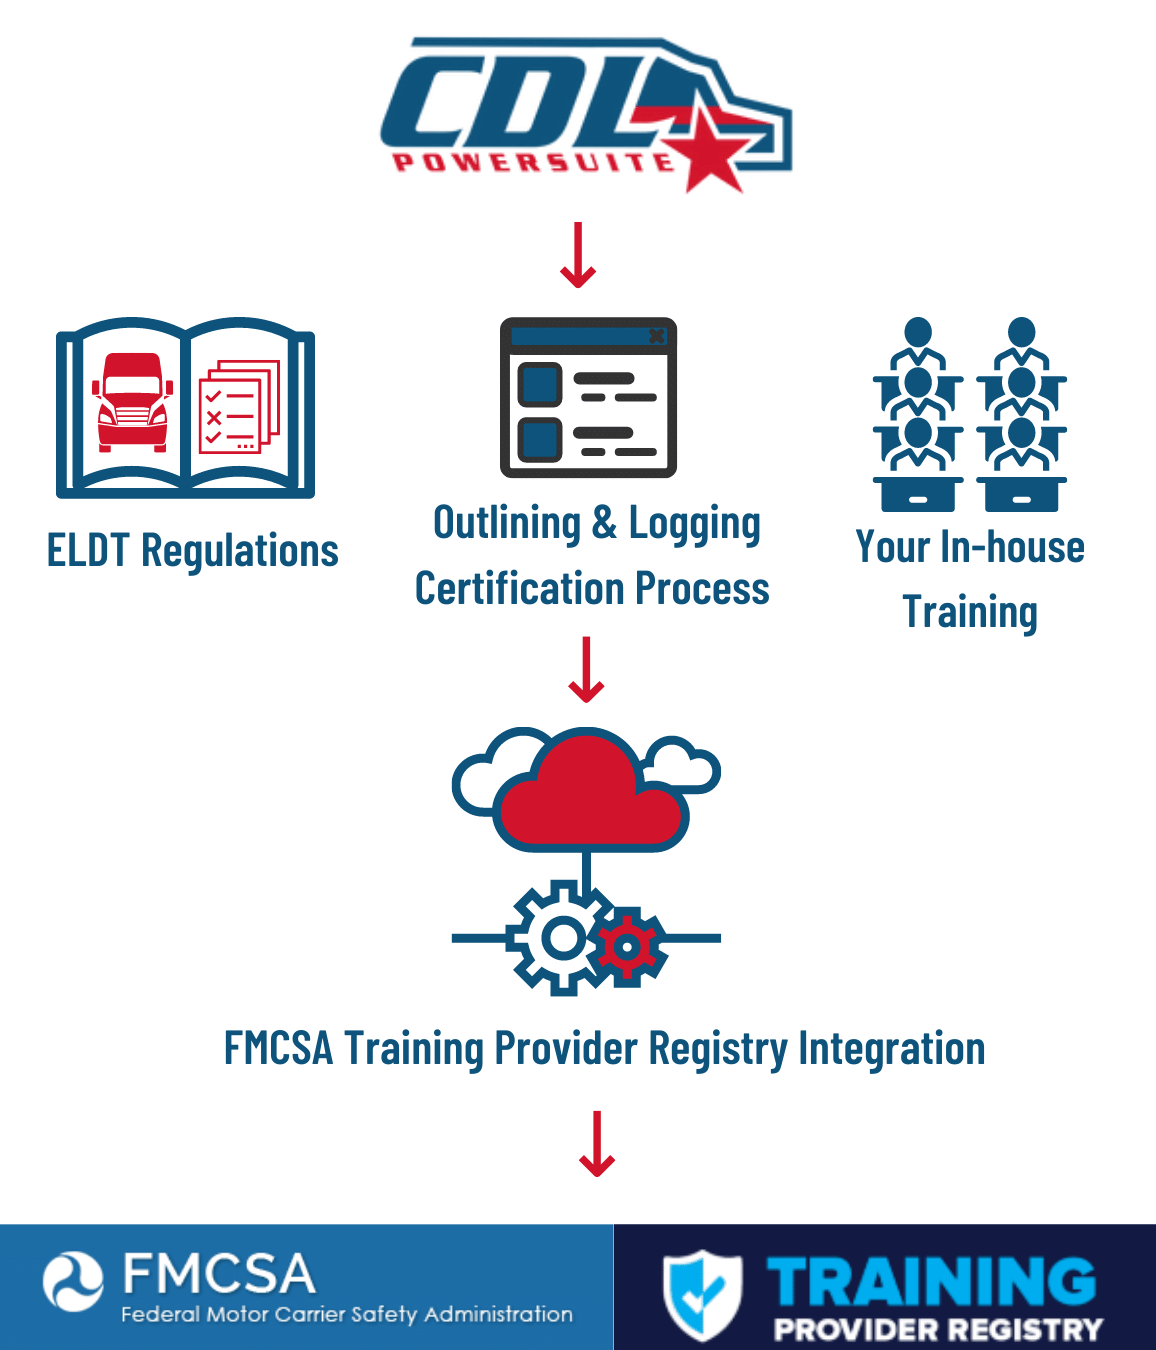 a diagram showing how the FMCSA training provider registry integration works with CDL PowerSuite